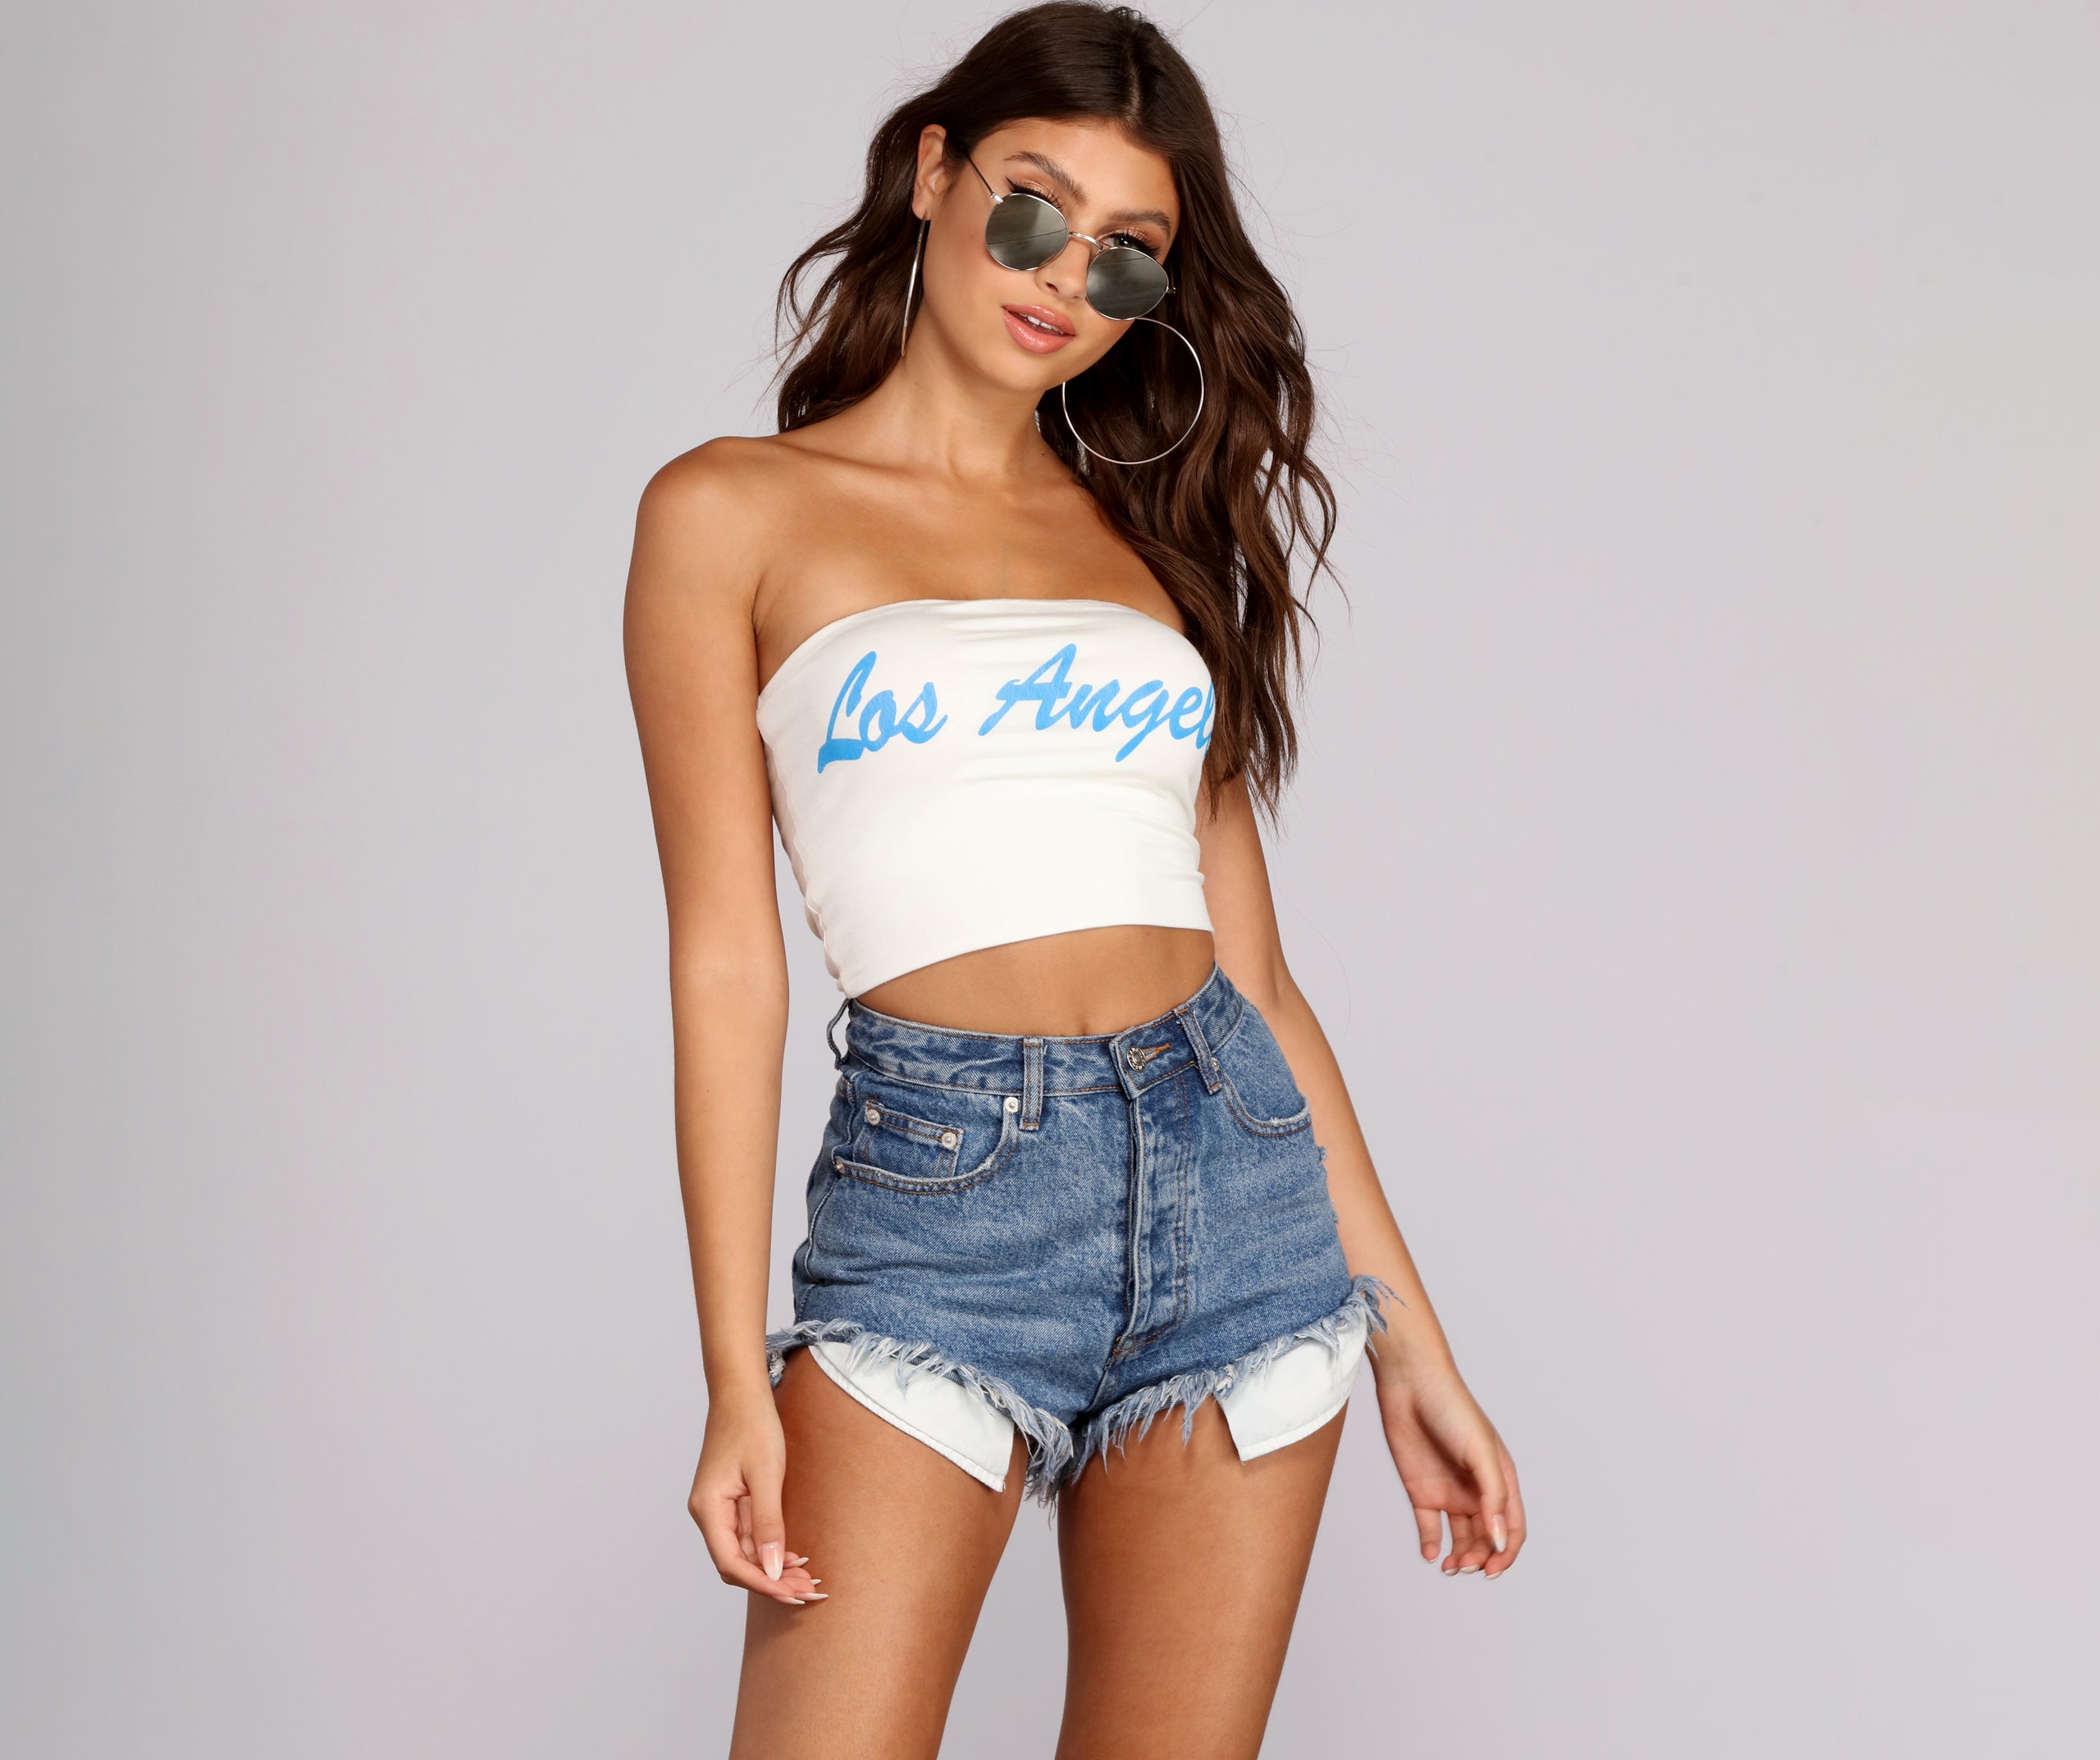 Los Angeles Graphic Tube Top